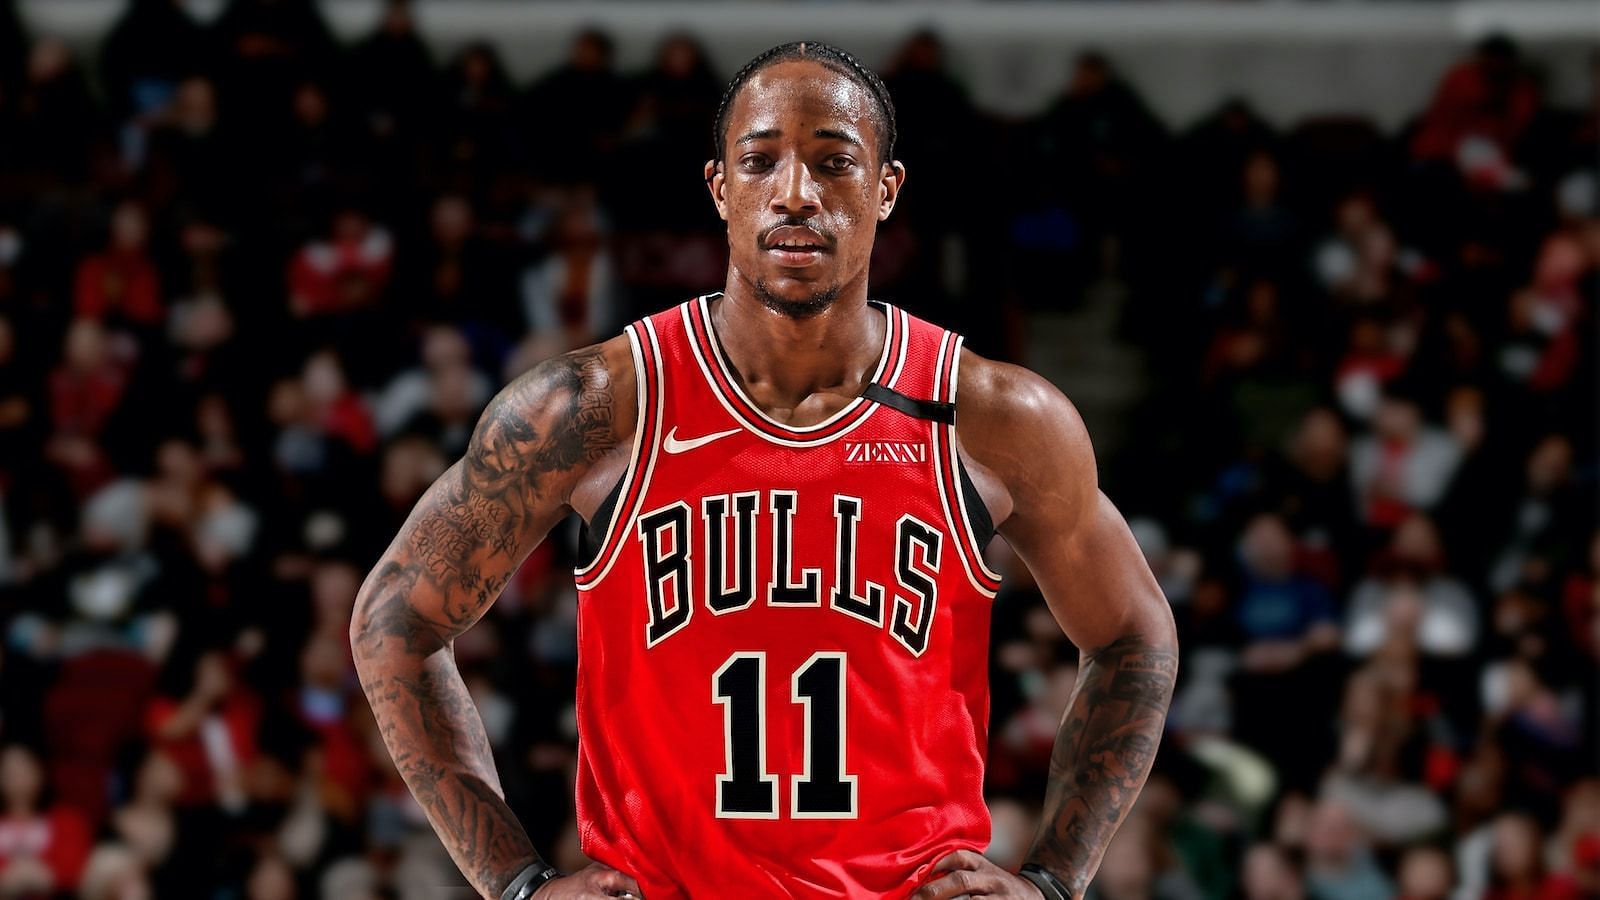 DeMar DeRozan had another clutch performance to lead the Chicago Bulls past the LA Lakers. [Photo: NBA.com]